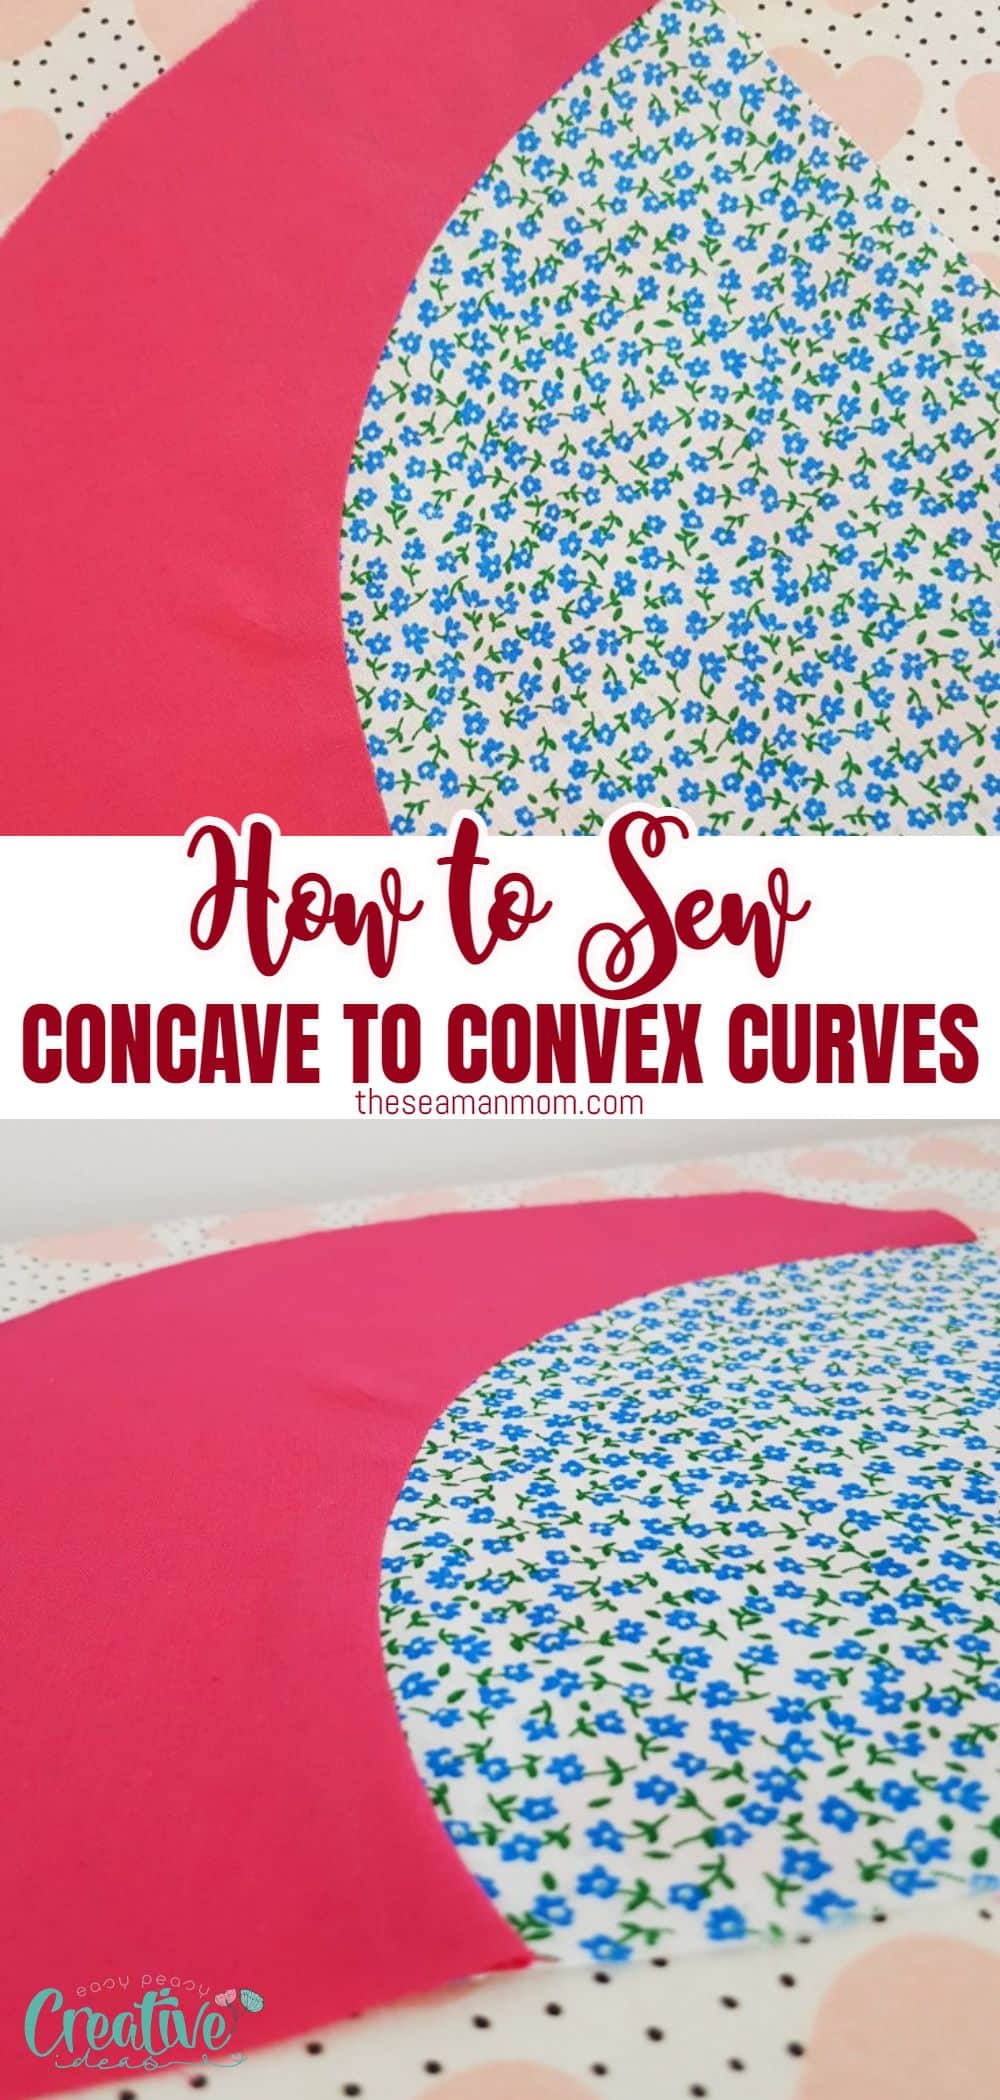 Master the basics of sewing curves with these simple tips & tricks! Learn how to sew convex and concave curves together with ease using the right supplies, tips and techniques and get the perfect curved seams every time! via @petroneagu